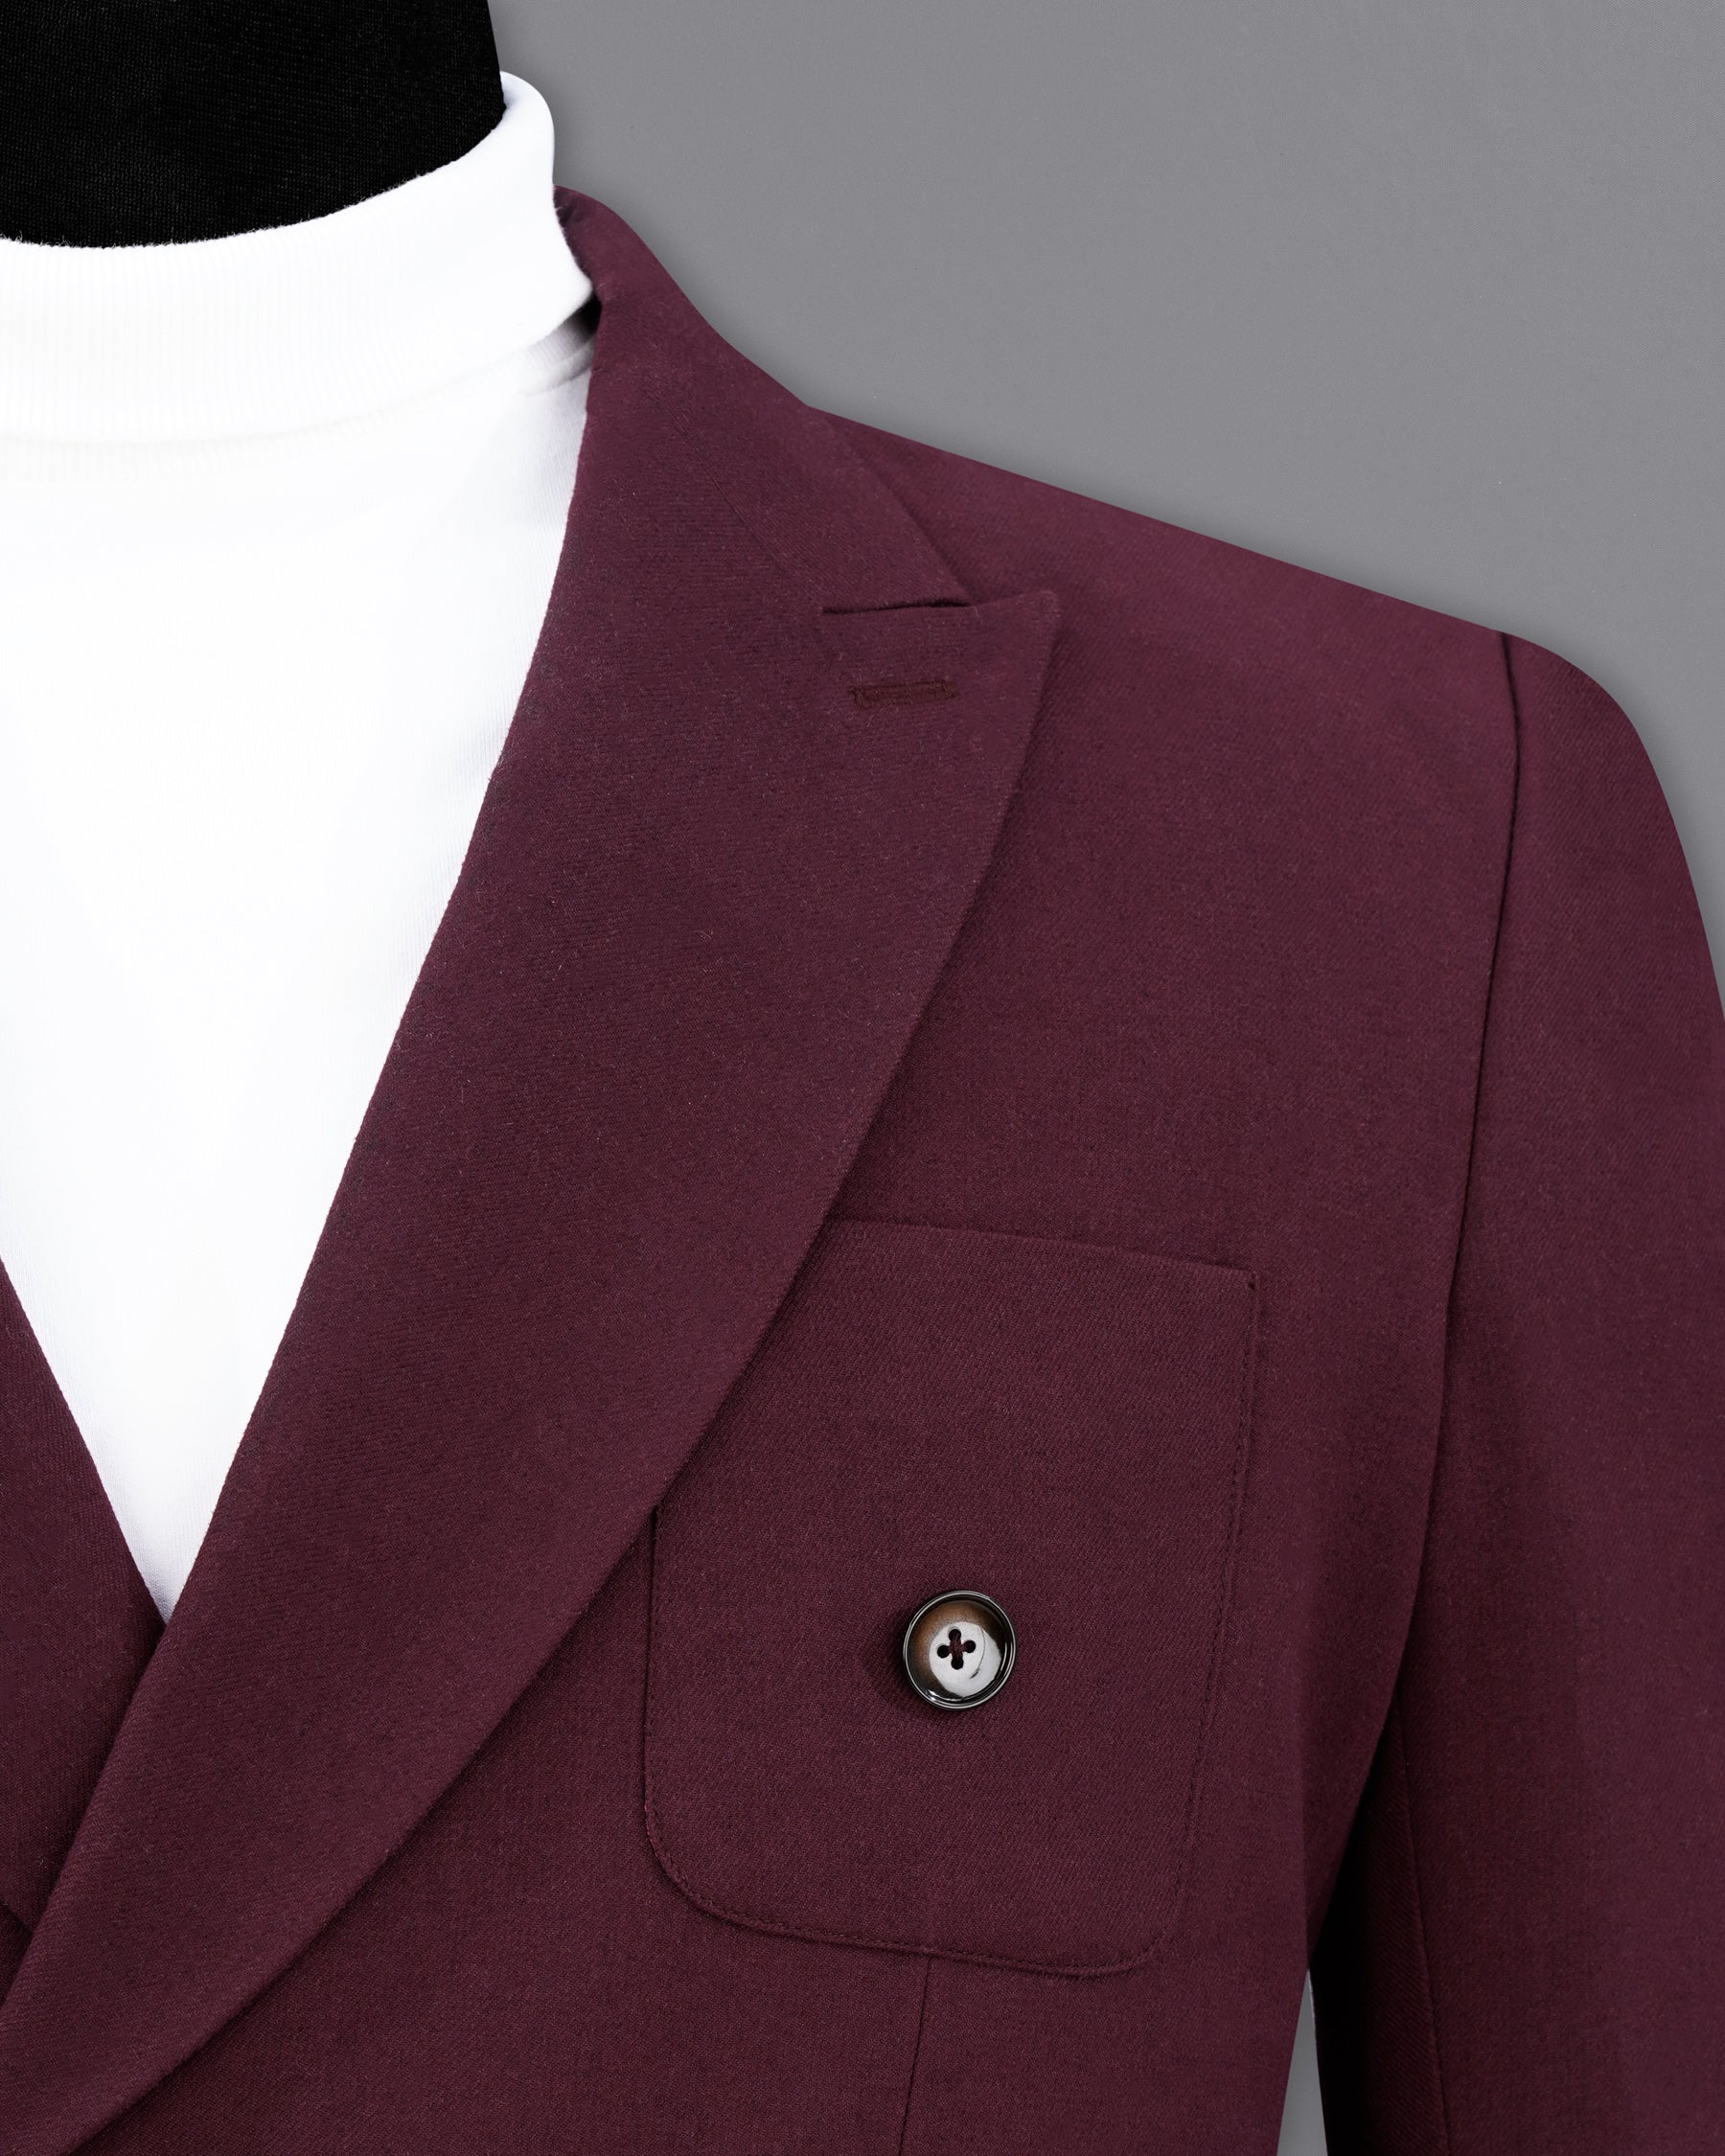 Wine Berry Wool Rich Double Breasted Sports Suit